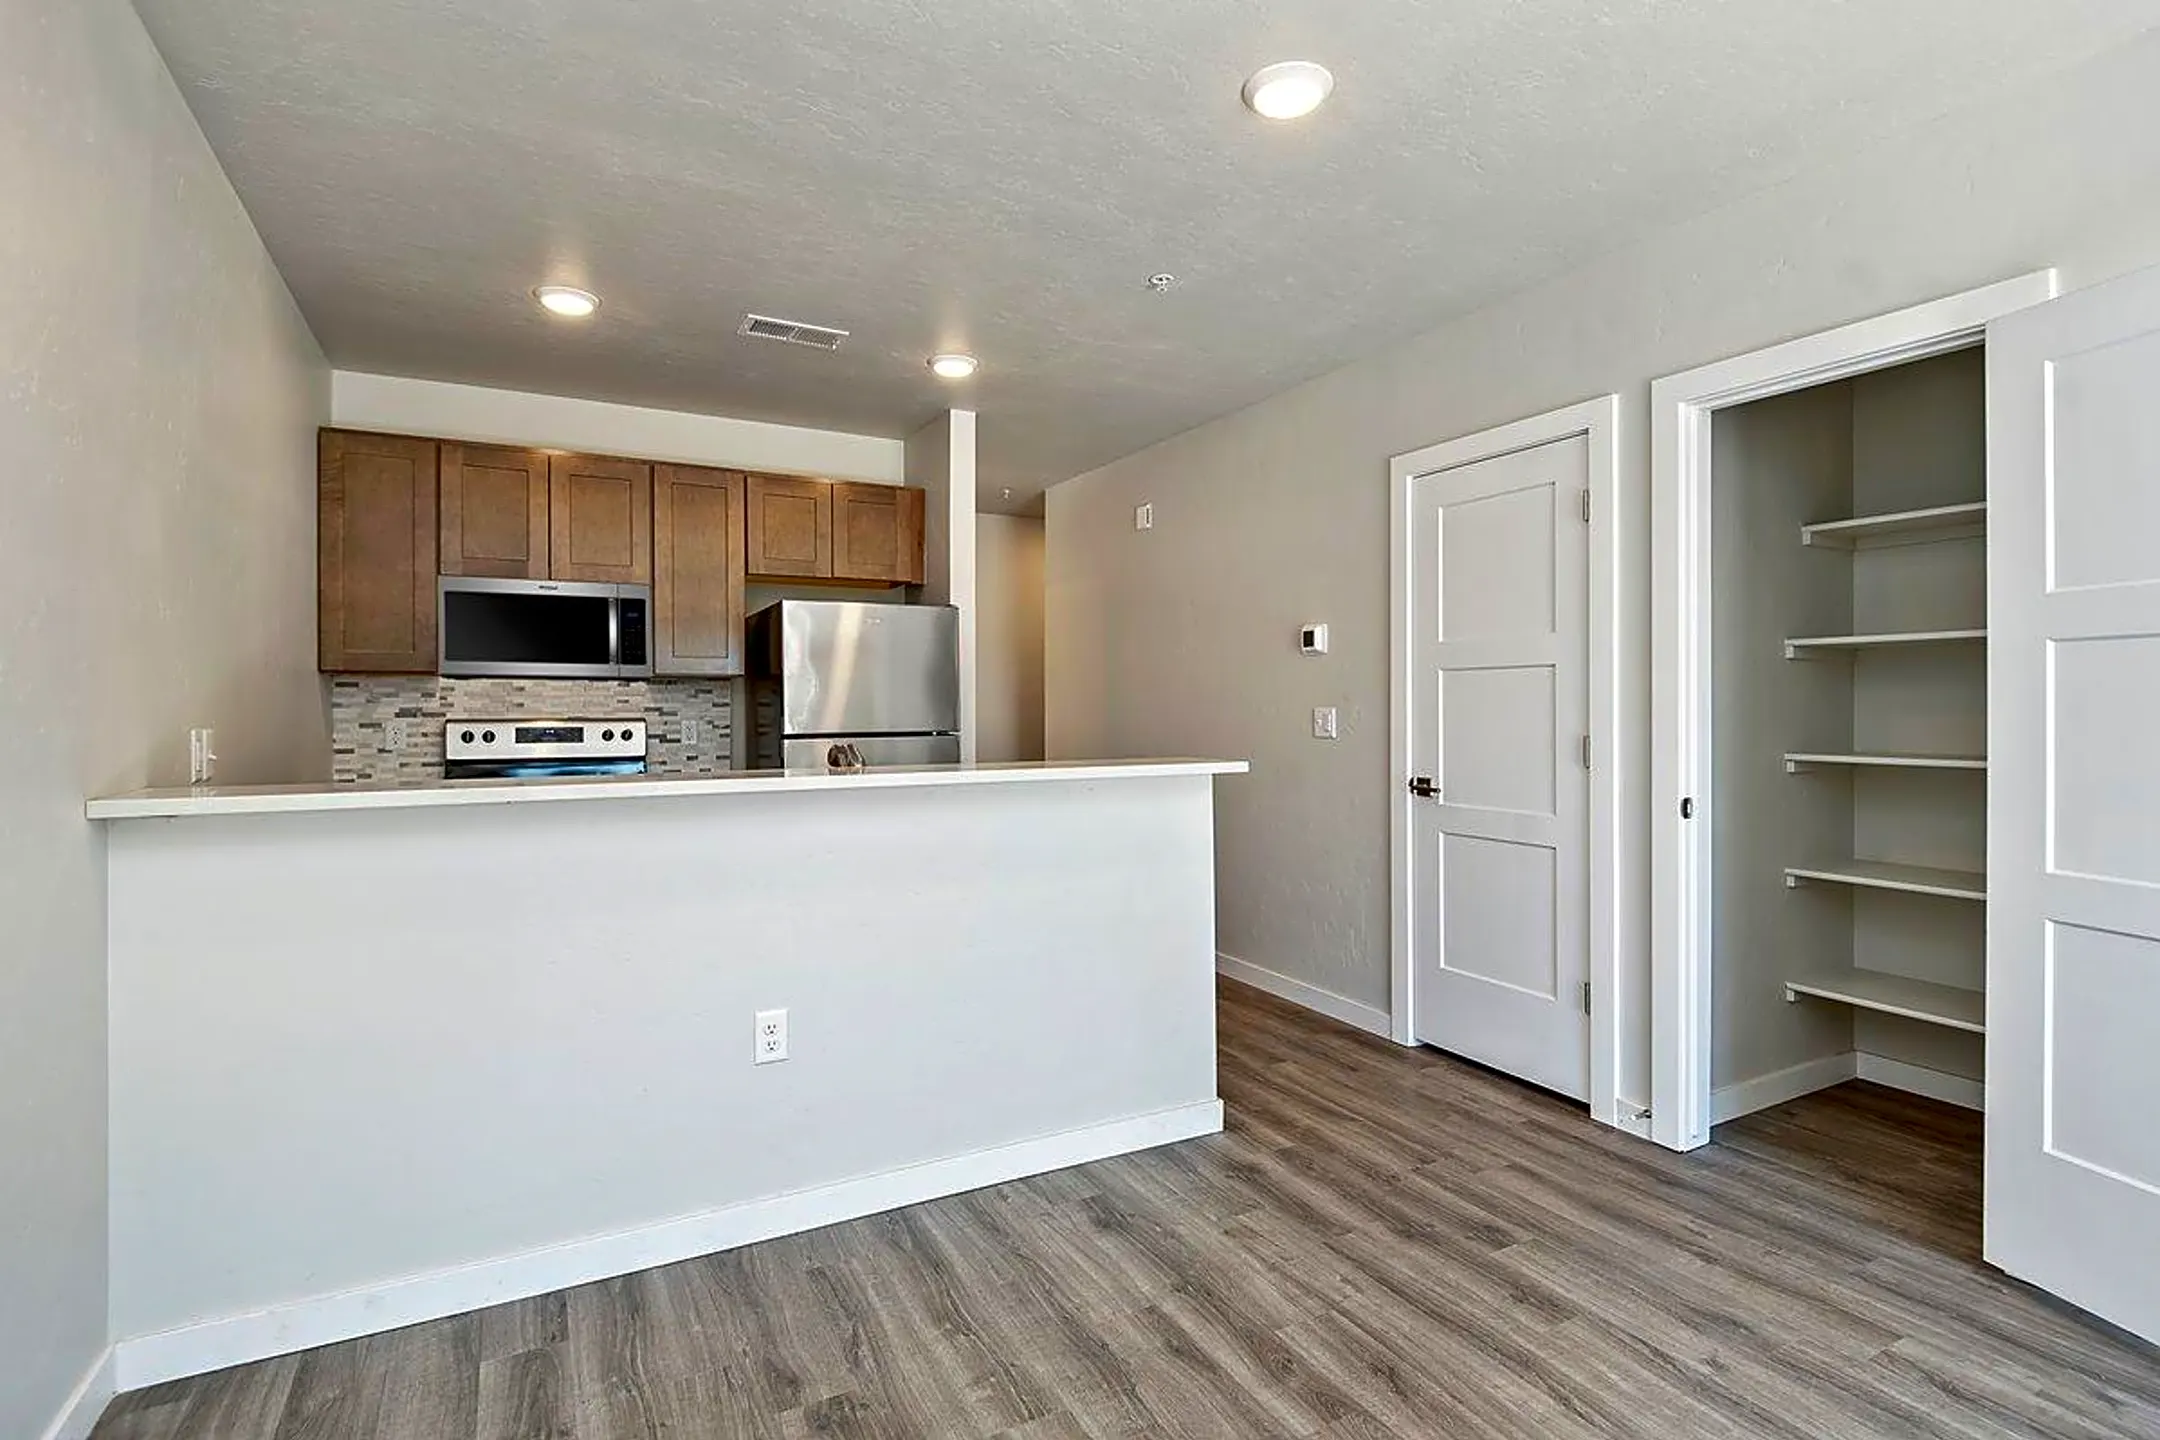 Kitchen - Townhomes At The Silo - Boise, ID